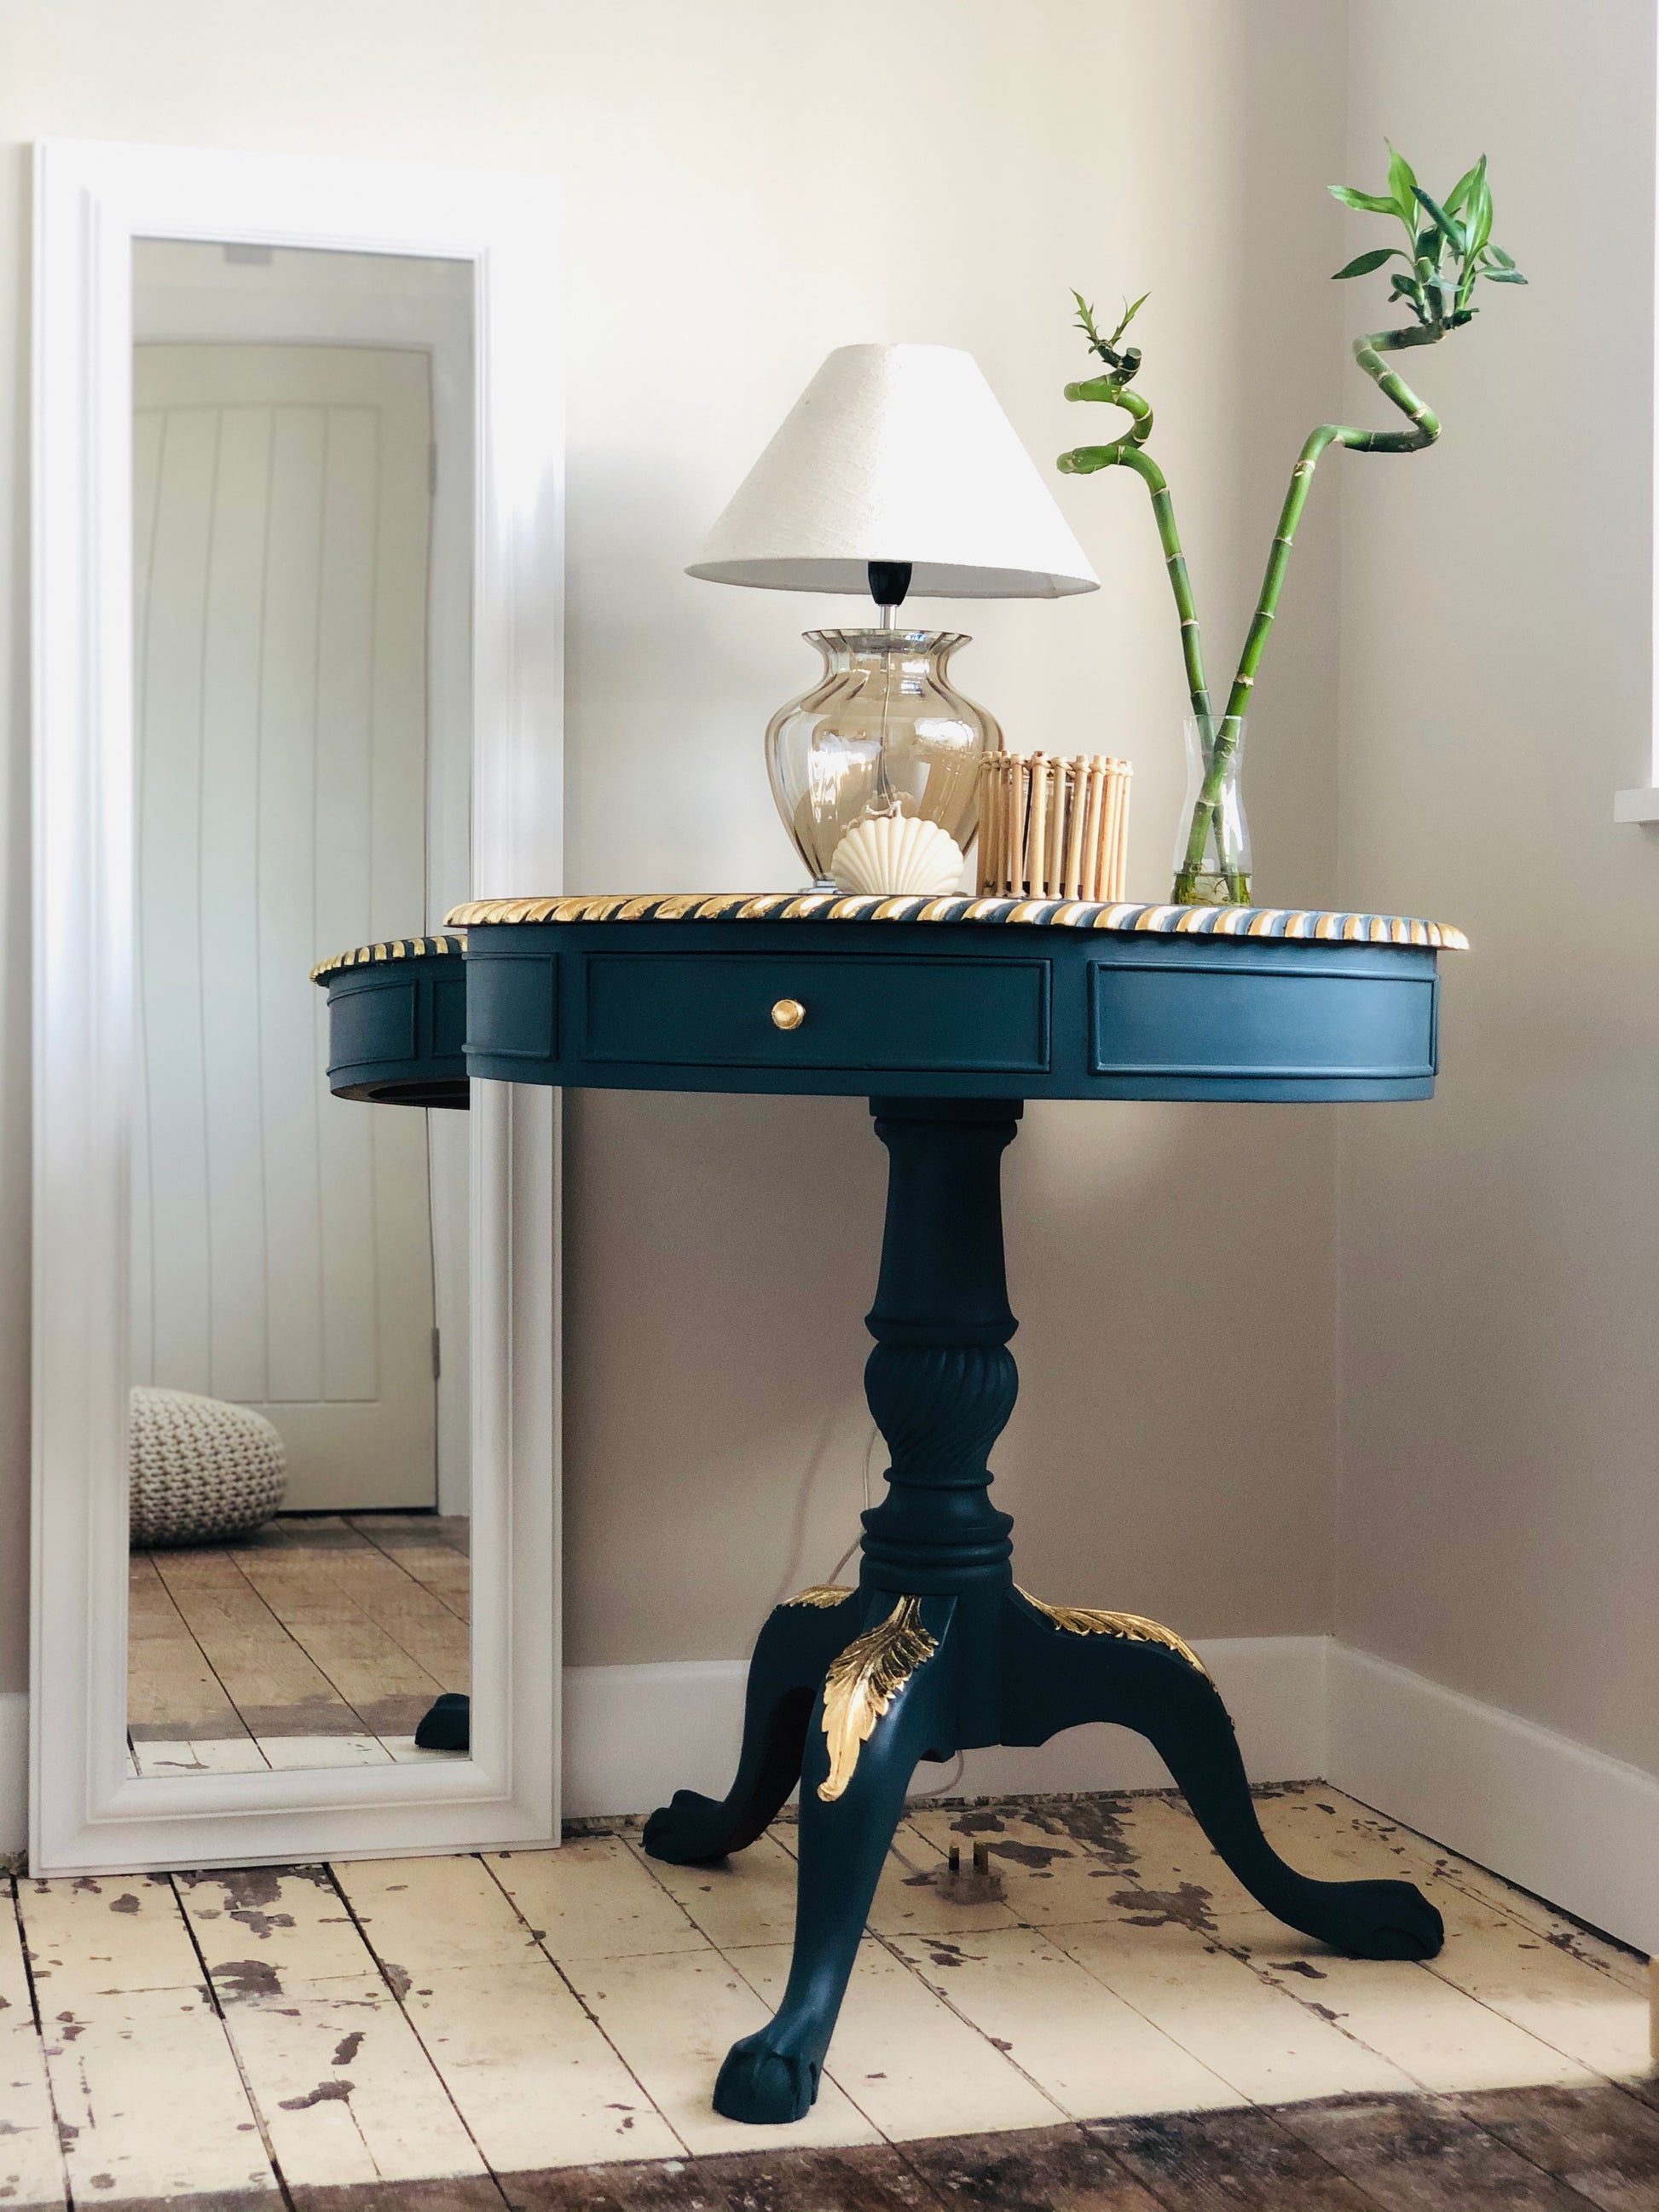 Blue hand painted vintage drum table with gold leaf detail